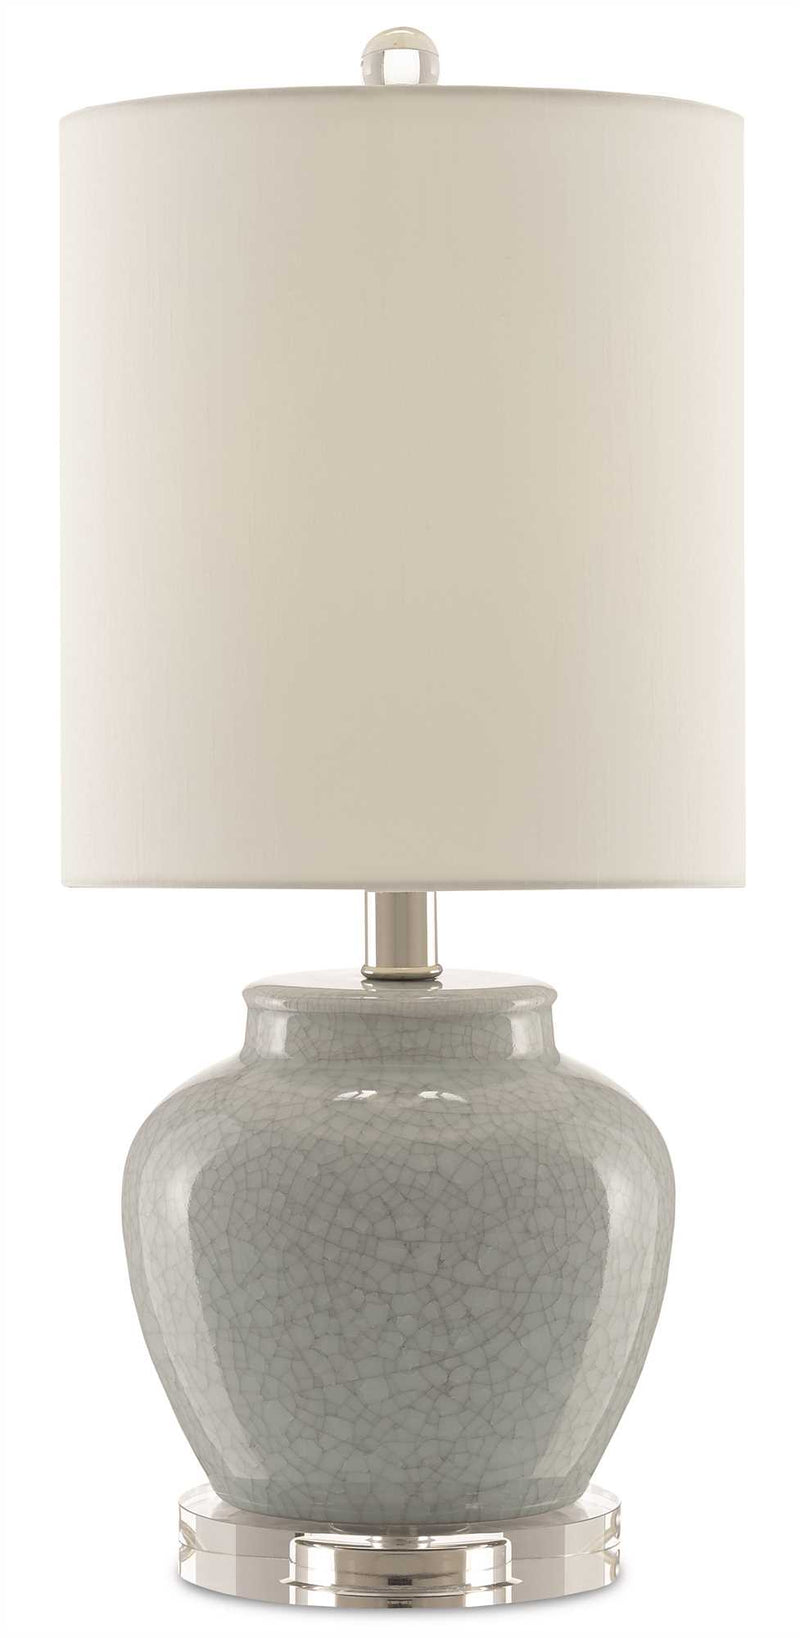 Currey and Company Marin Table Lamp 6000-0315